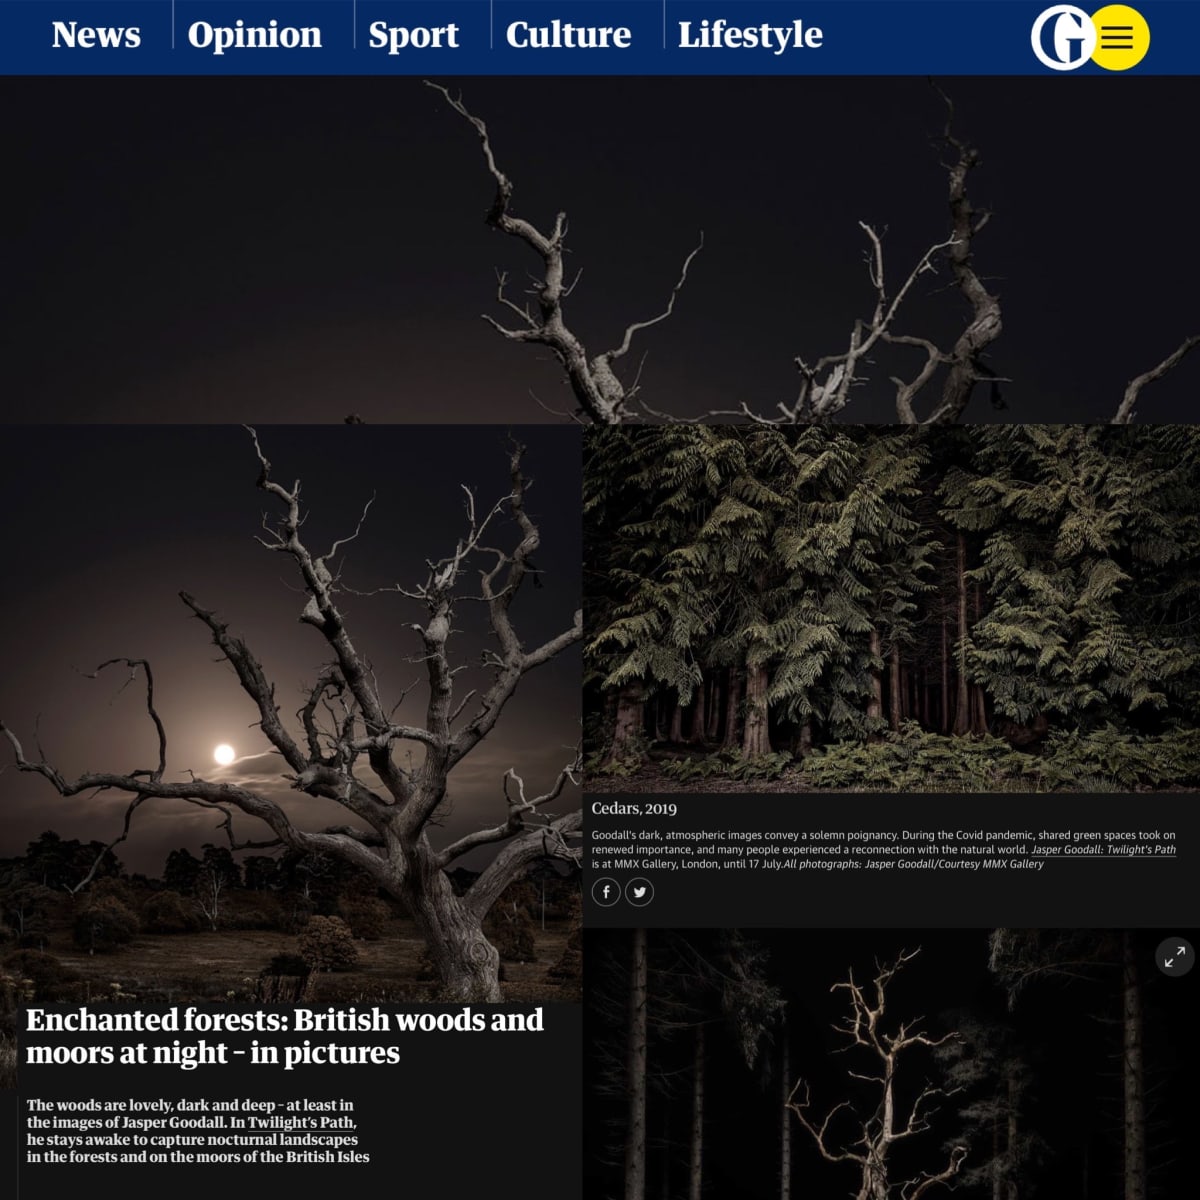 Enchanted forests: British woods and moors at night - in pictures | Online feature: Jasper Goodall's Twilight's Path at MMX Gallery